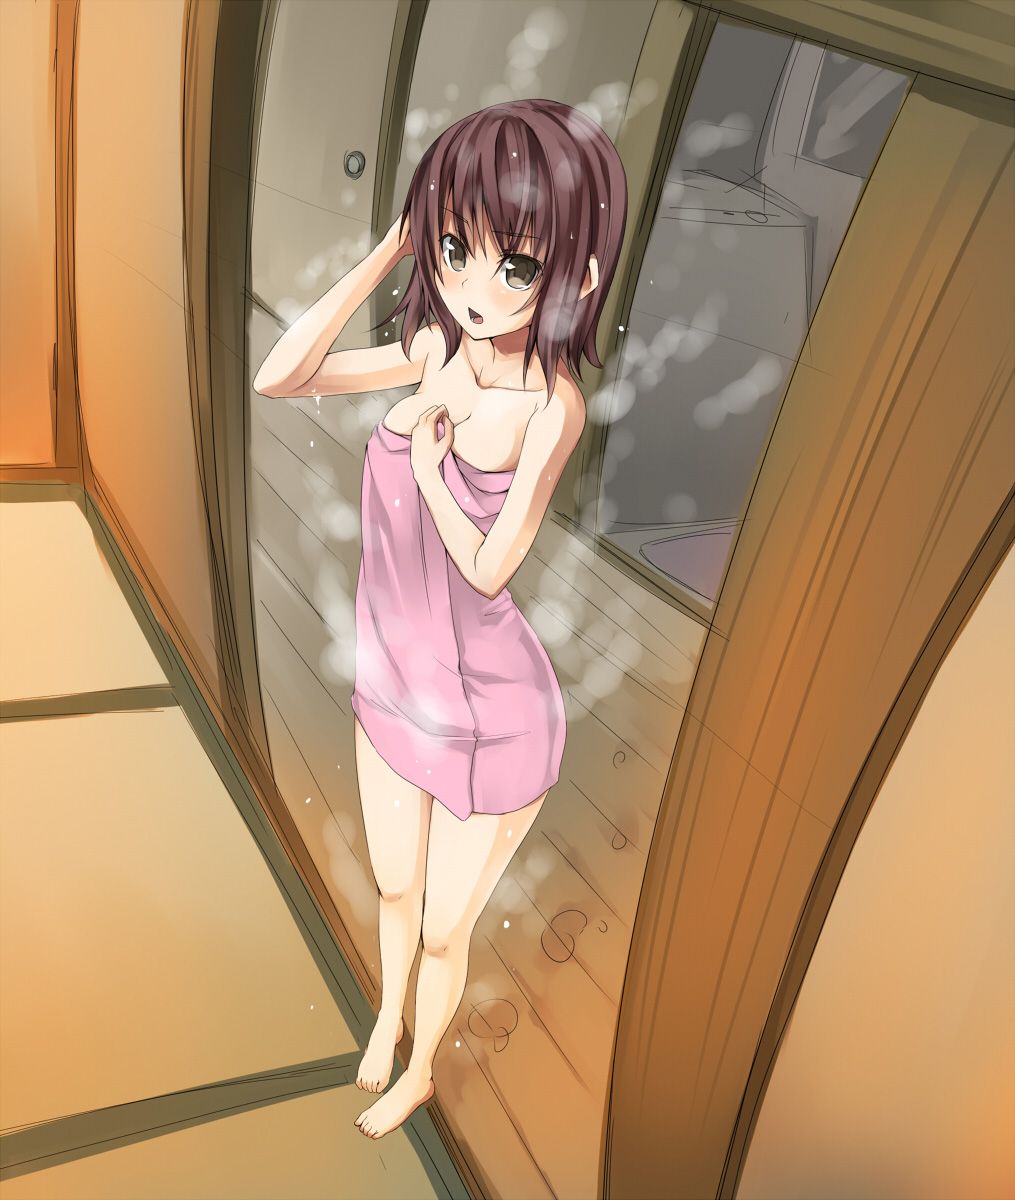 Two-dimensional bath towel to hide your body 50 photos of cute girl 2